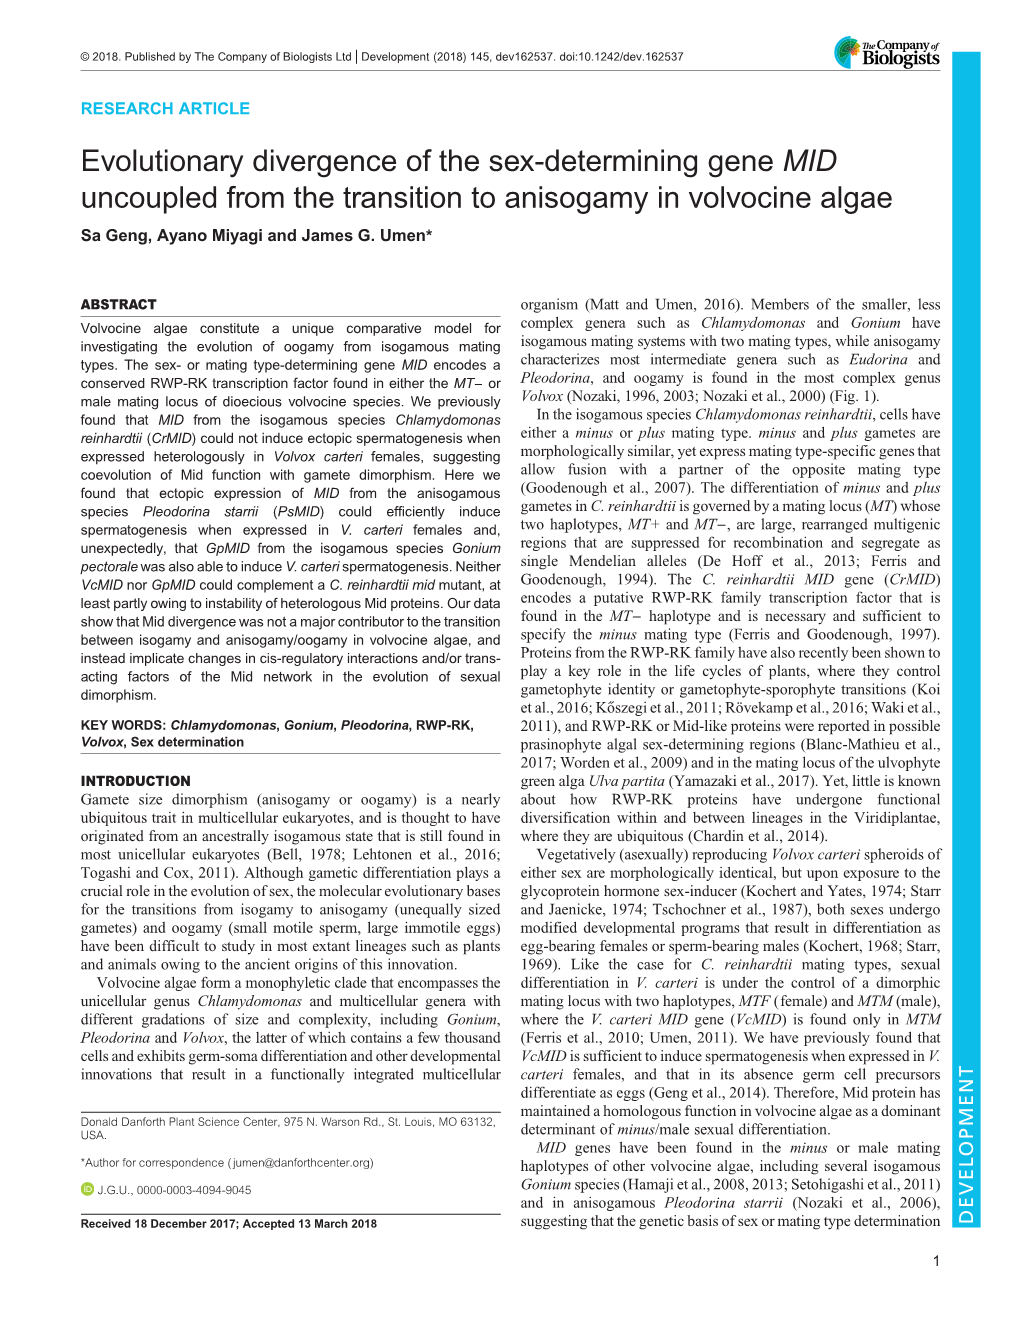 Evolutionary Divergence of the Sex-Determining Gene MID Uncoupled from the Transition to Anisogamy in Volvocine Algae Sa Geng, Ayano Miyagi and James G